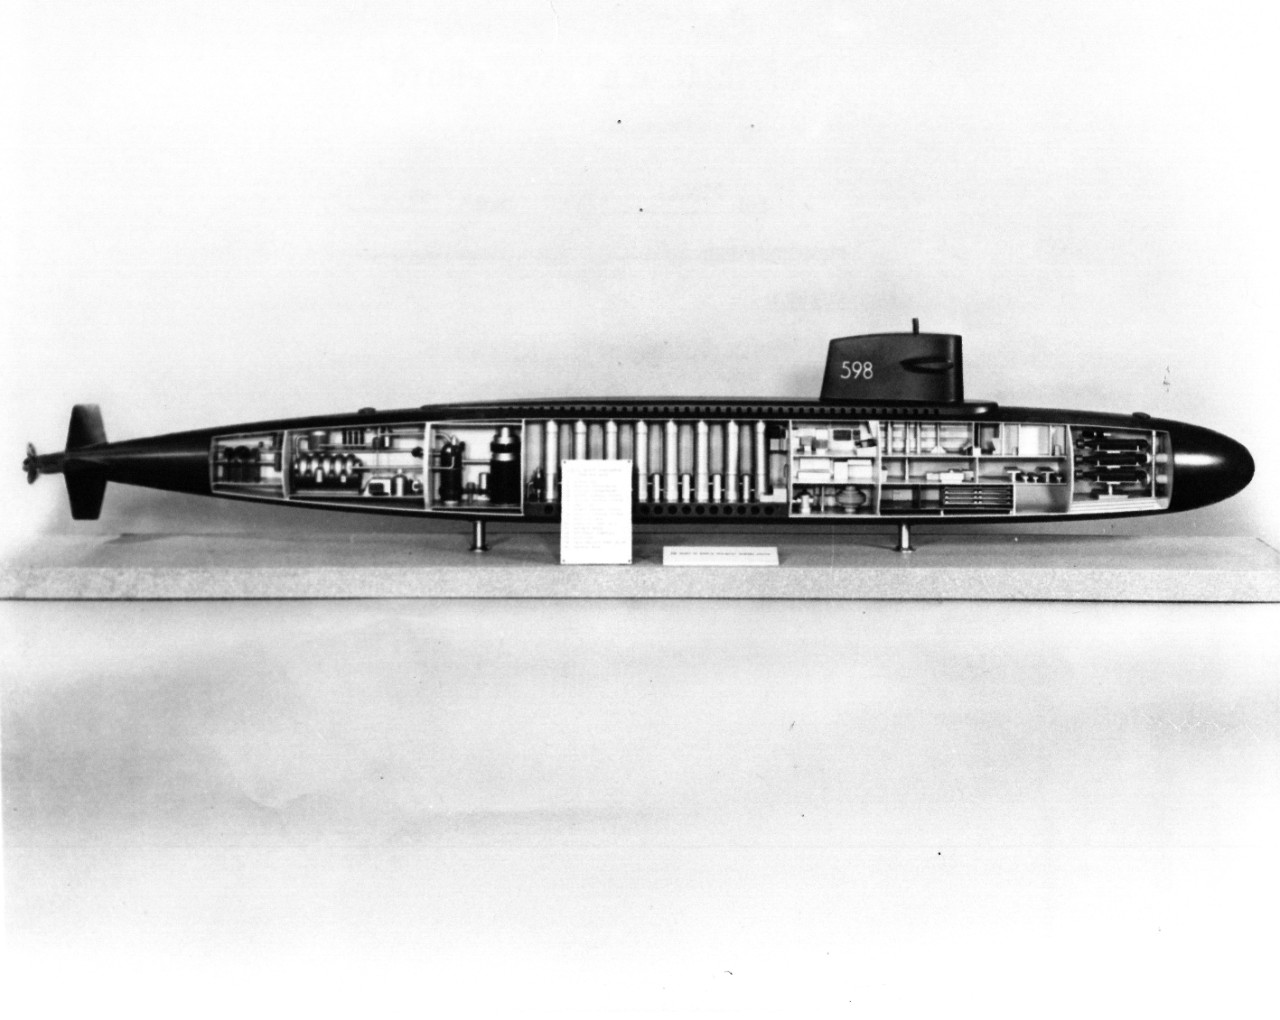 Model of submarine George Washington with side panel removed to show interior compartments and ballistic missiles